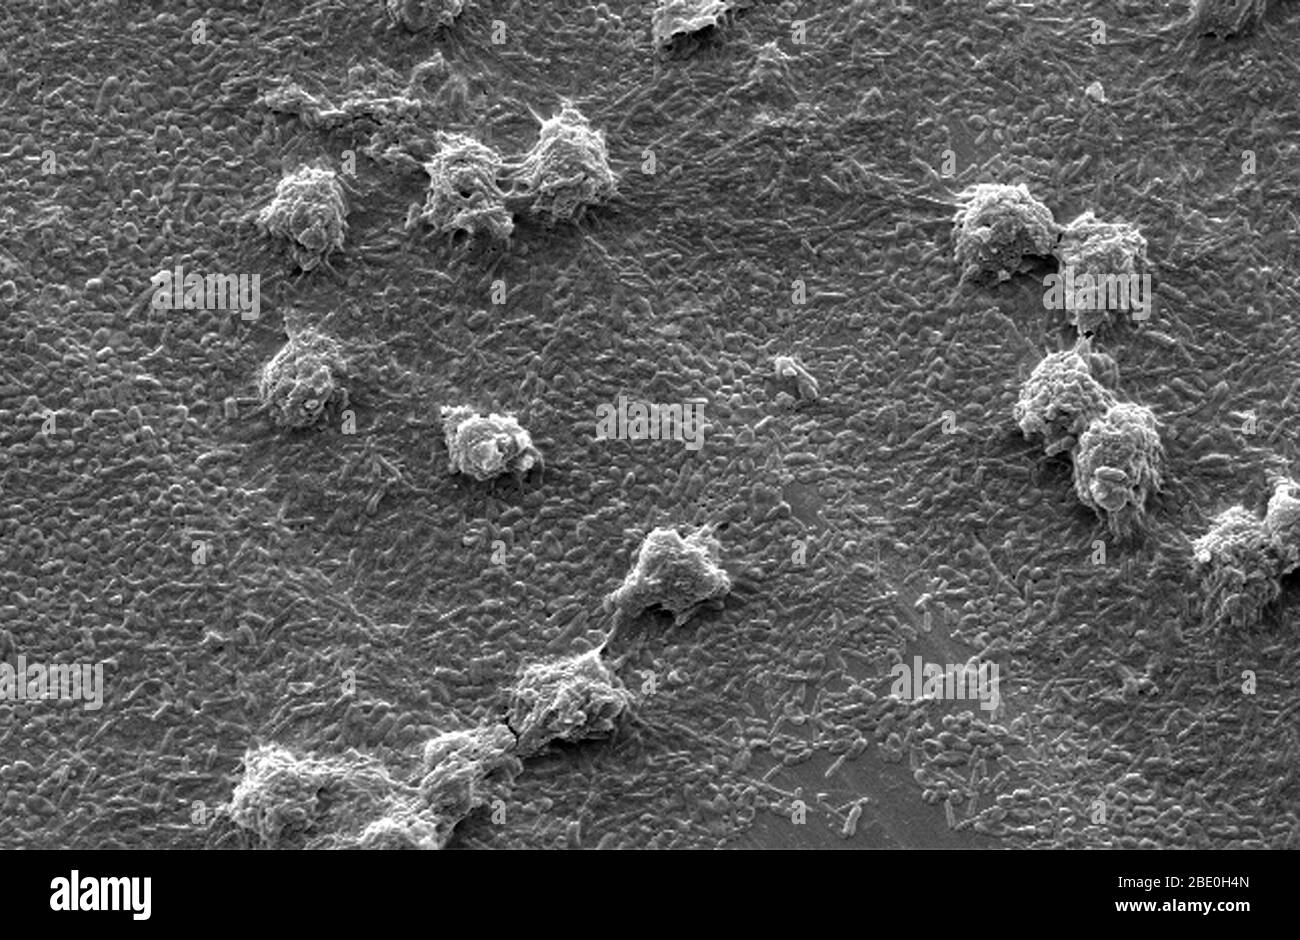 Scanning Electron Micrograph (SEM) showing ultrastructural morphology exhibited by a number of Vermamoeba vermiformis (Hartmannella) amoebae trophozoites. As part of a study to determine whether Legionella pneumophila bacteria can colonize and grow in biofilms with or without the presence of V. vermiformis, here these protozoa were situated atop a base biofilm composed of Pseudomonas aeruginosa, Klebsiella pneumoniae and a Flavobacterium sp. bacteria. Note that the amoebae were grazing upon these bacteria which reveals the scoured stainless steel coupon surface. Vermamoeba vermiformis a free-l Stock Photo